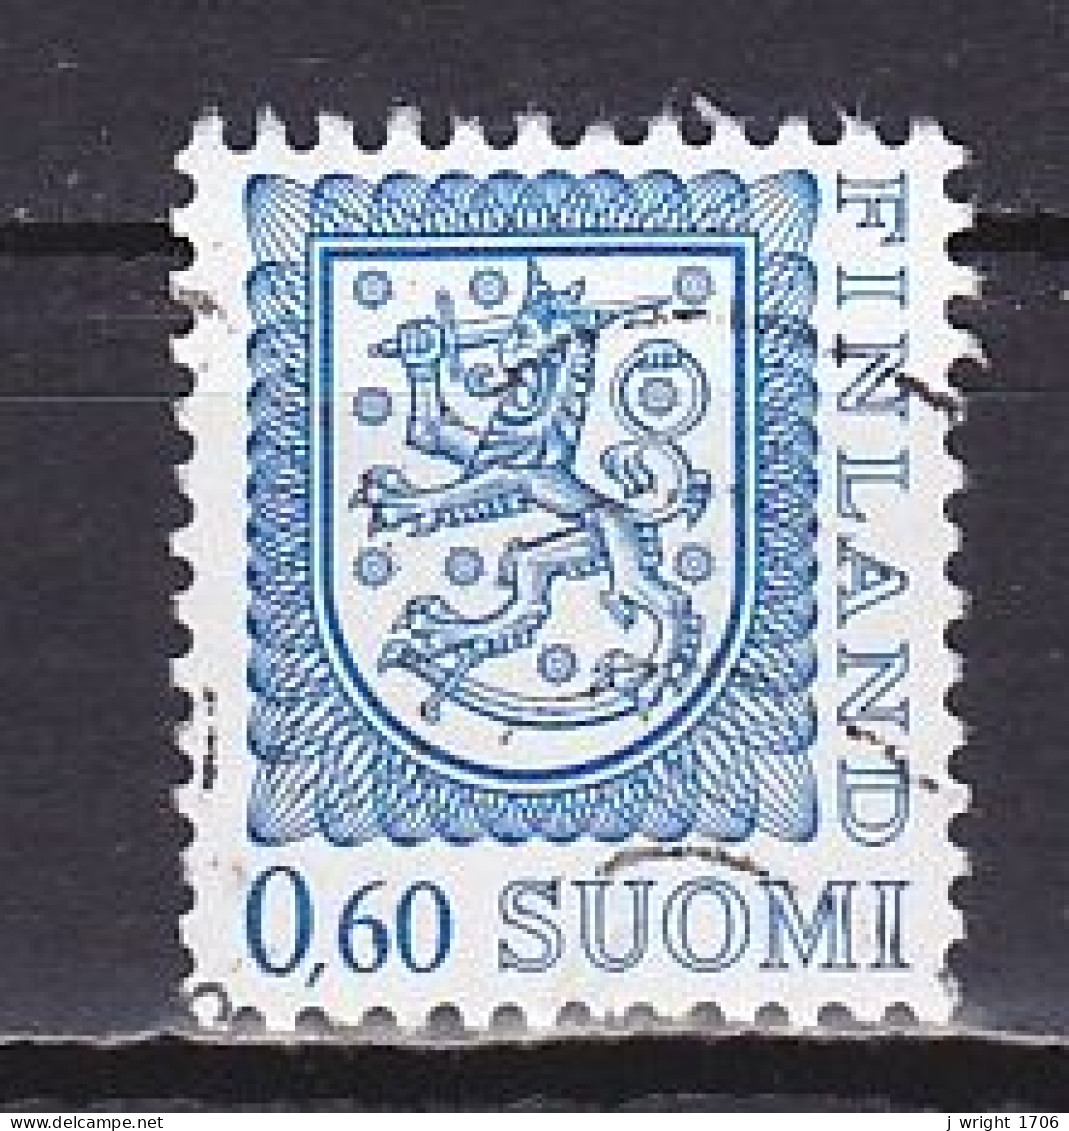 Finland, 1975, Coat Of Arms, 0.60mk, USED - Used Stamps